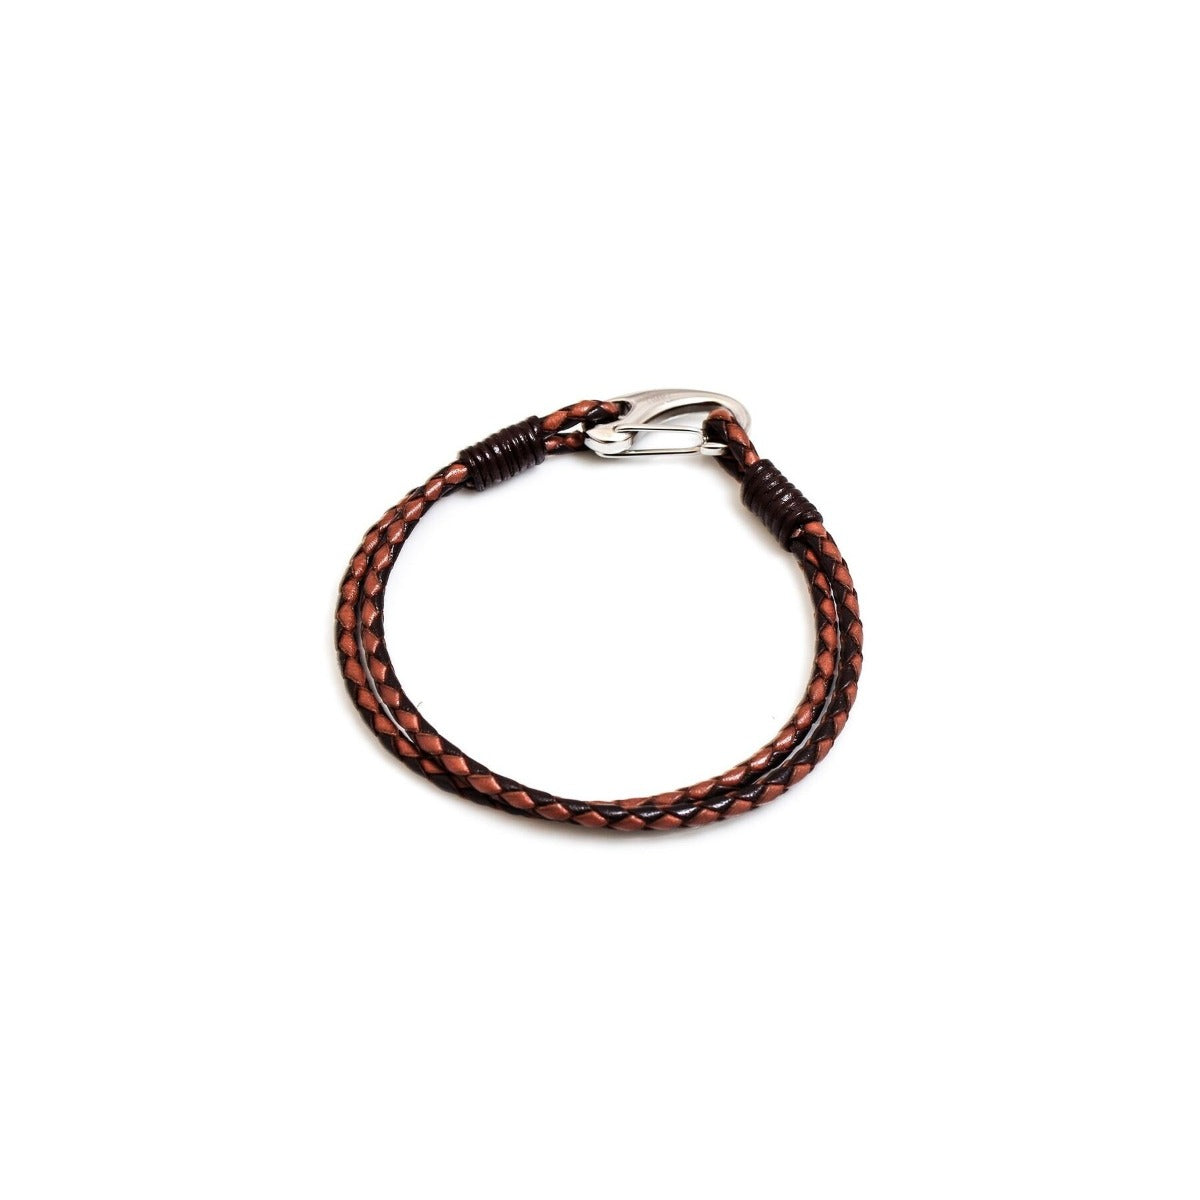 Hiho Silver Plaited Leather Bracelet with Silver Clasp